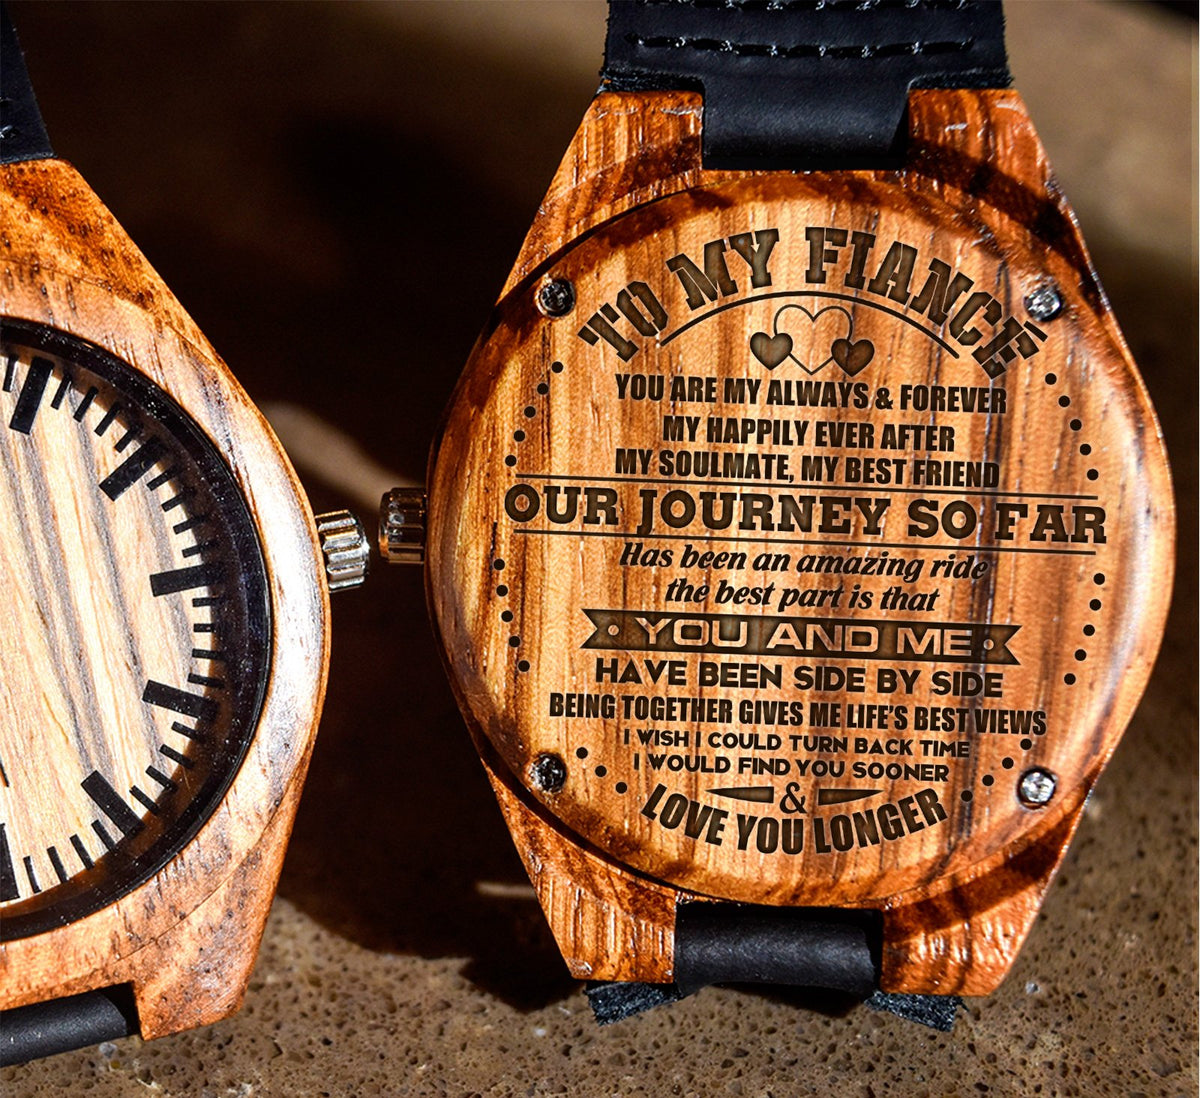 To My Fiance - Our Journey So Far Has Been An Amazing Ride - Wooden Watch